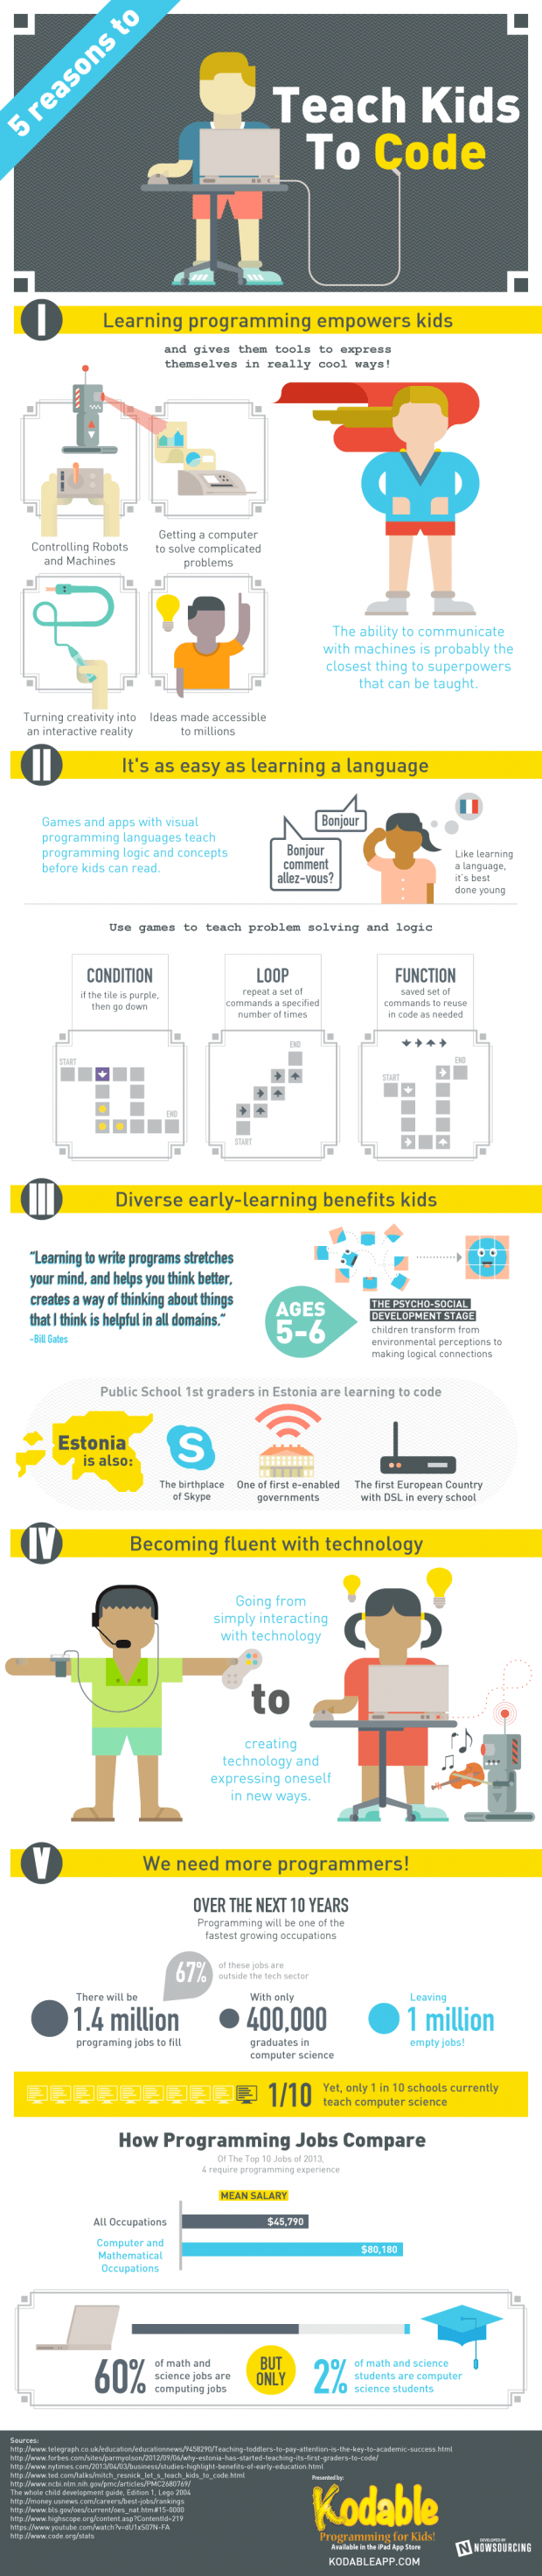 5 Reasons to Teach Kids to Code Infographic thumbnail